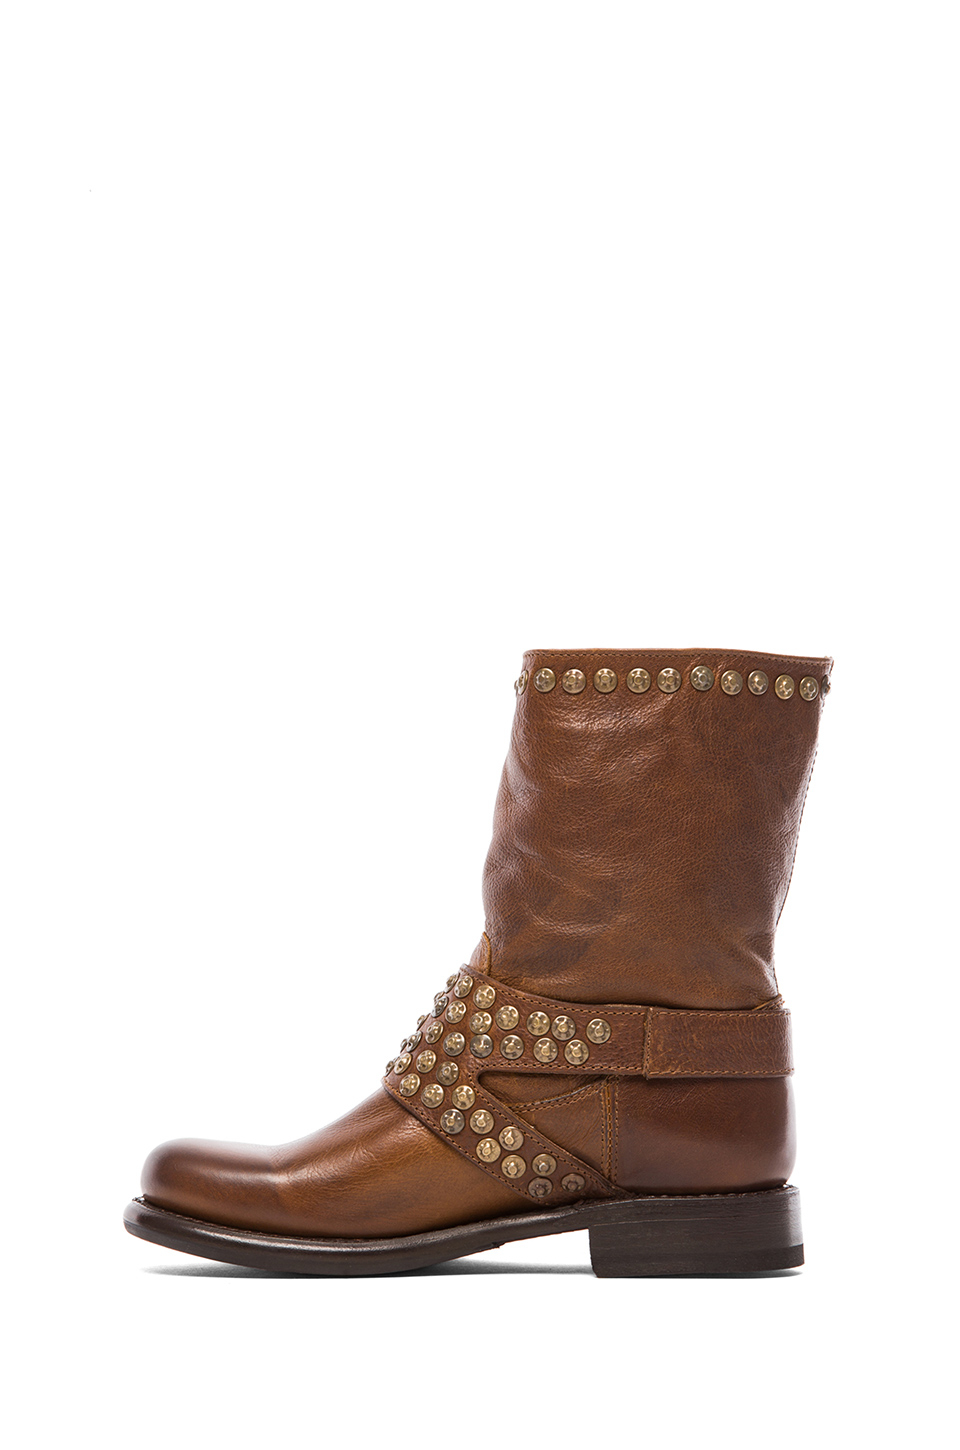 Brown studded boots